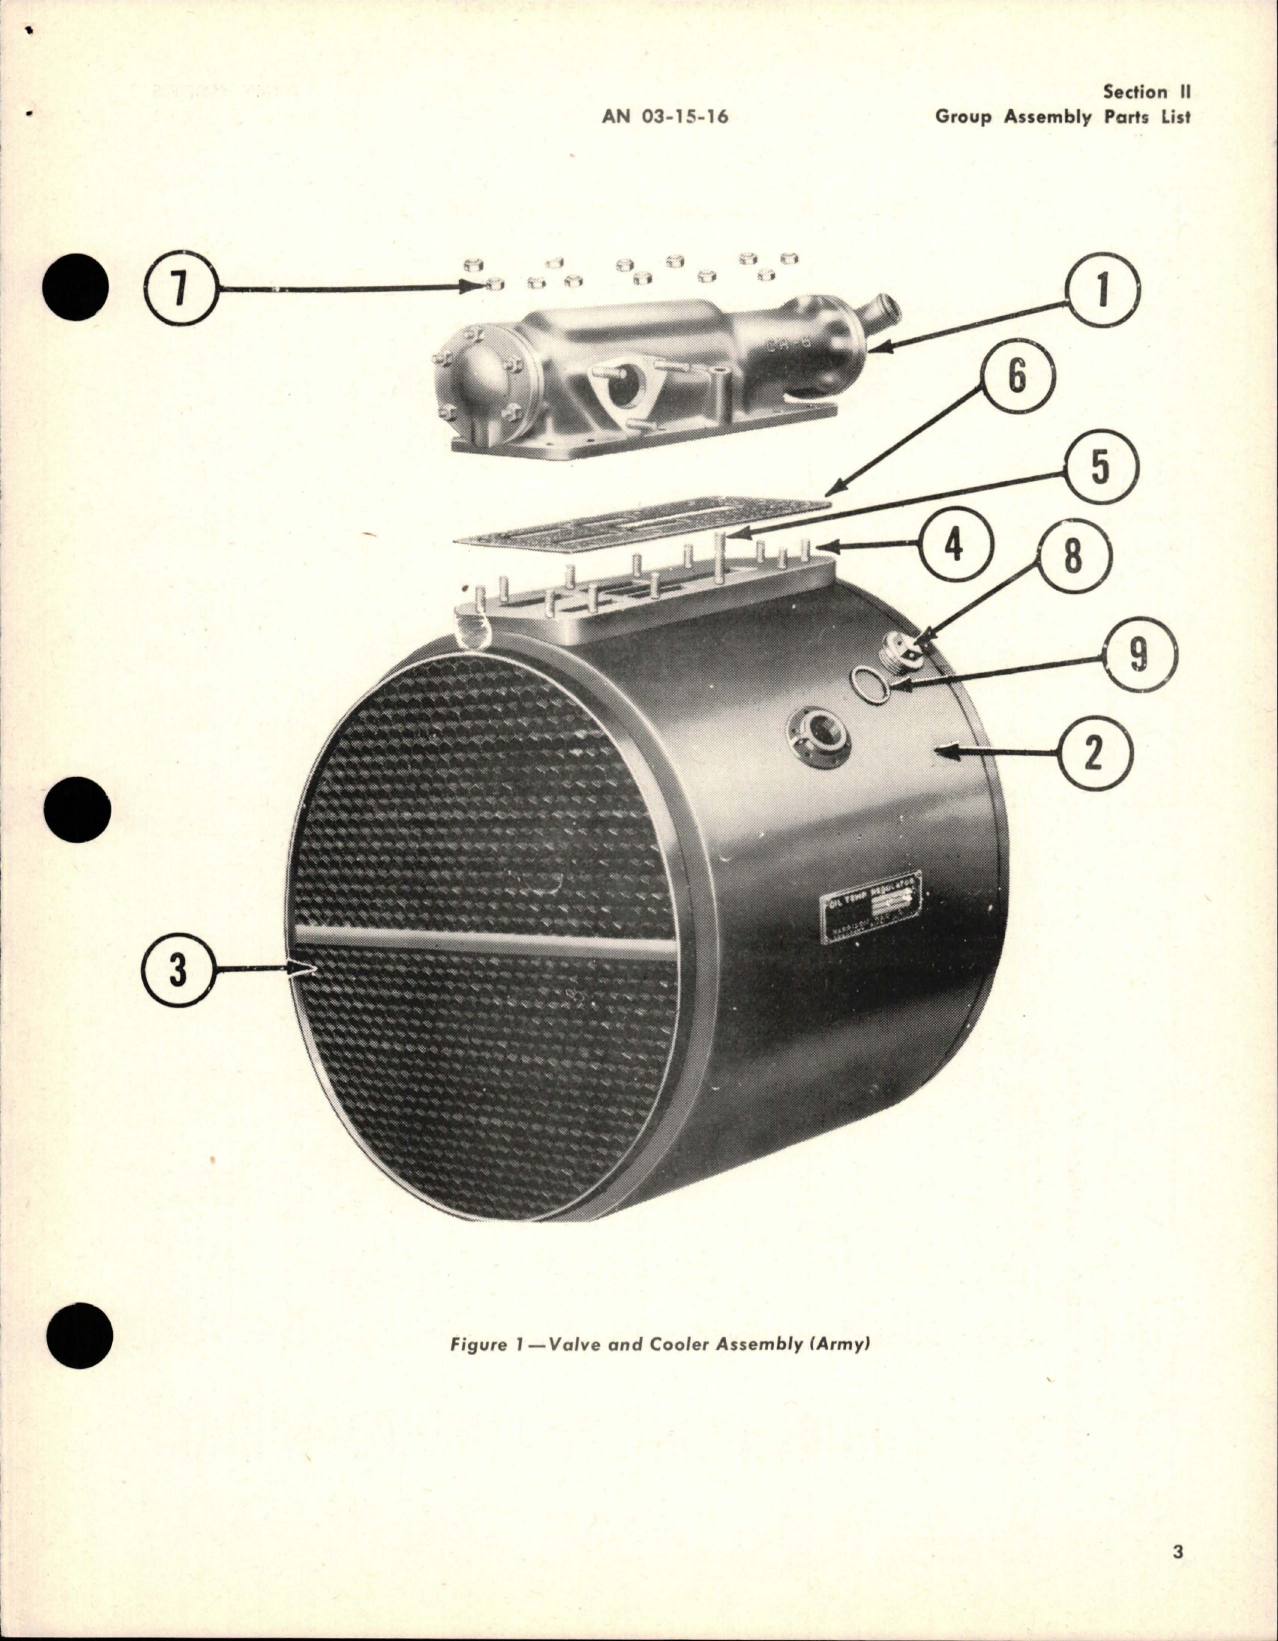 Sample page 7 from AirCorps Library document: Parts Catalog for Oil Coolers & Control Valves 